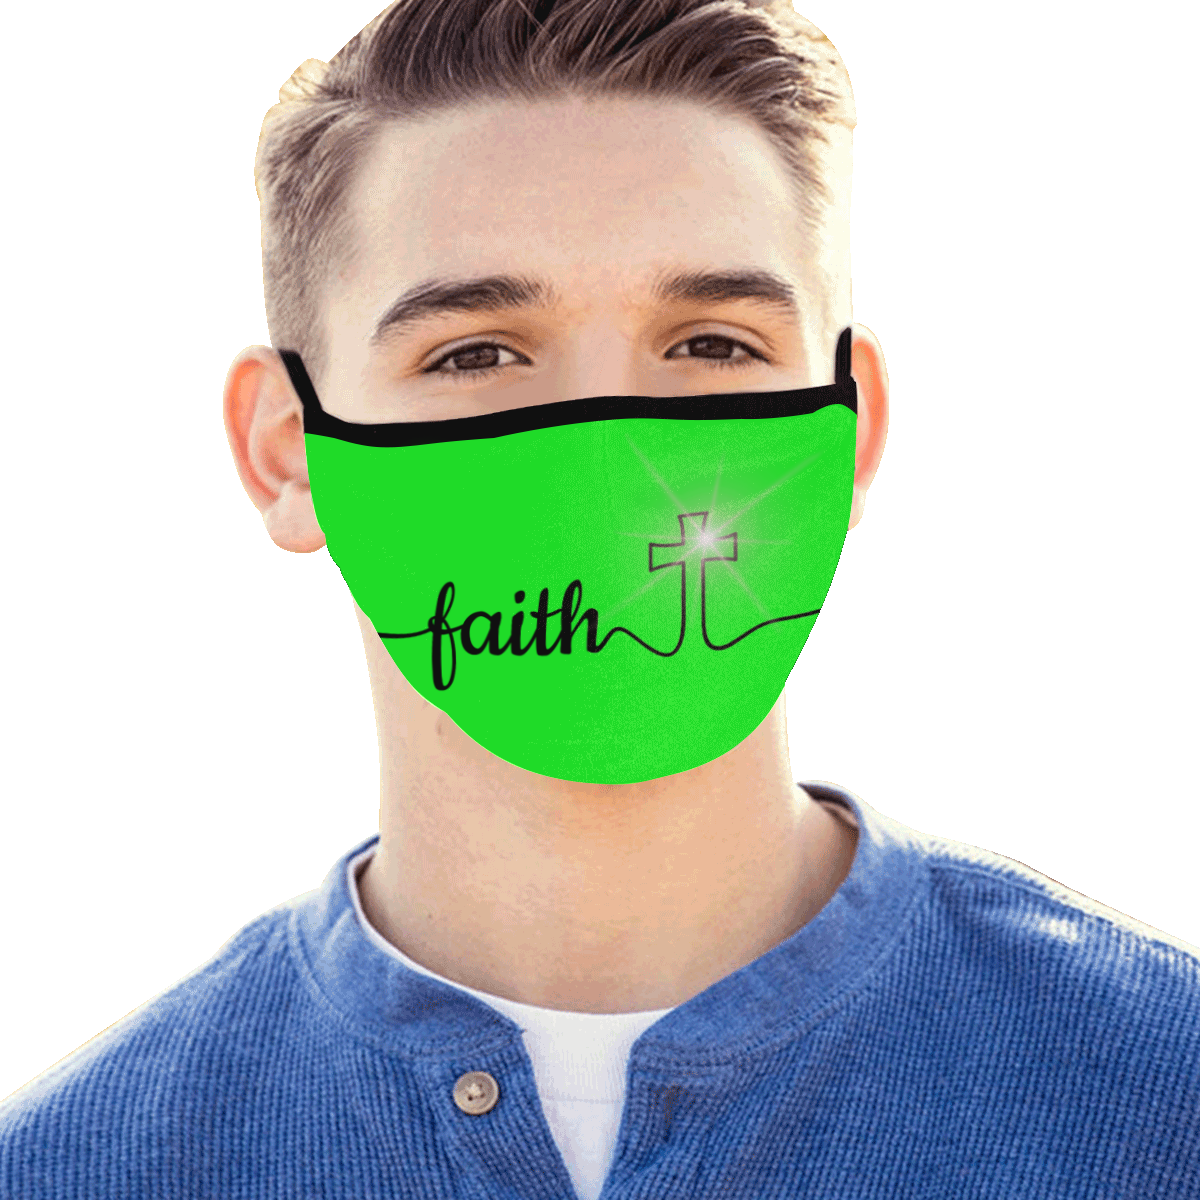 Fairlings Delight's The Word Collection- Faith 53086a2 Mouth Mask